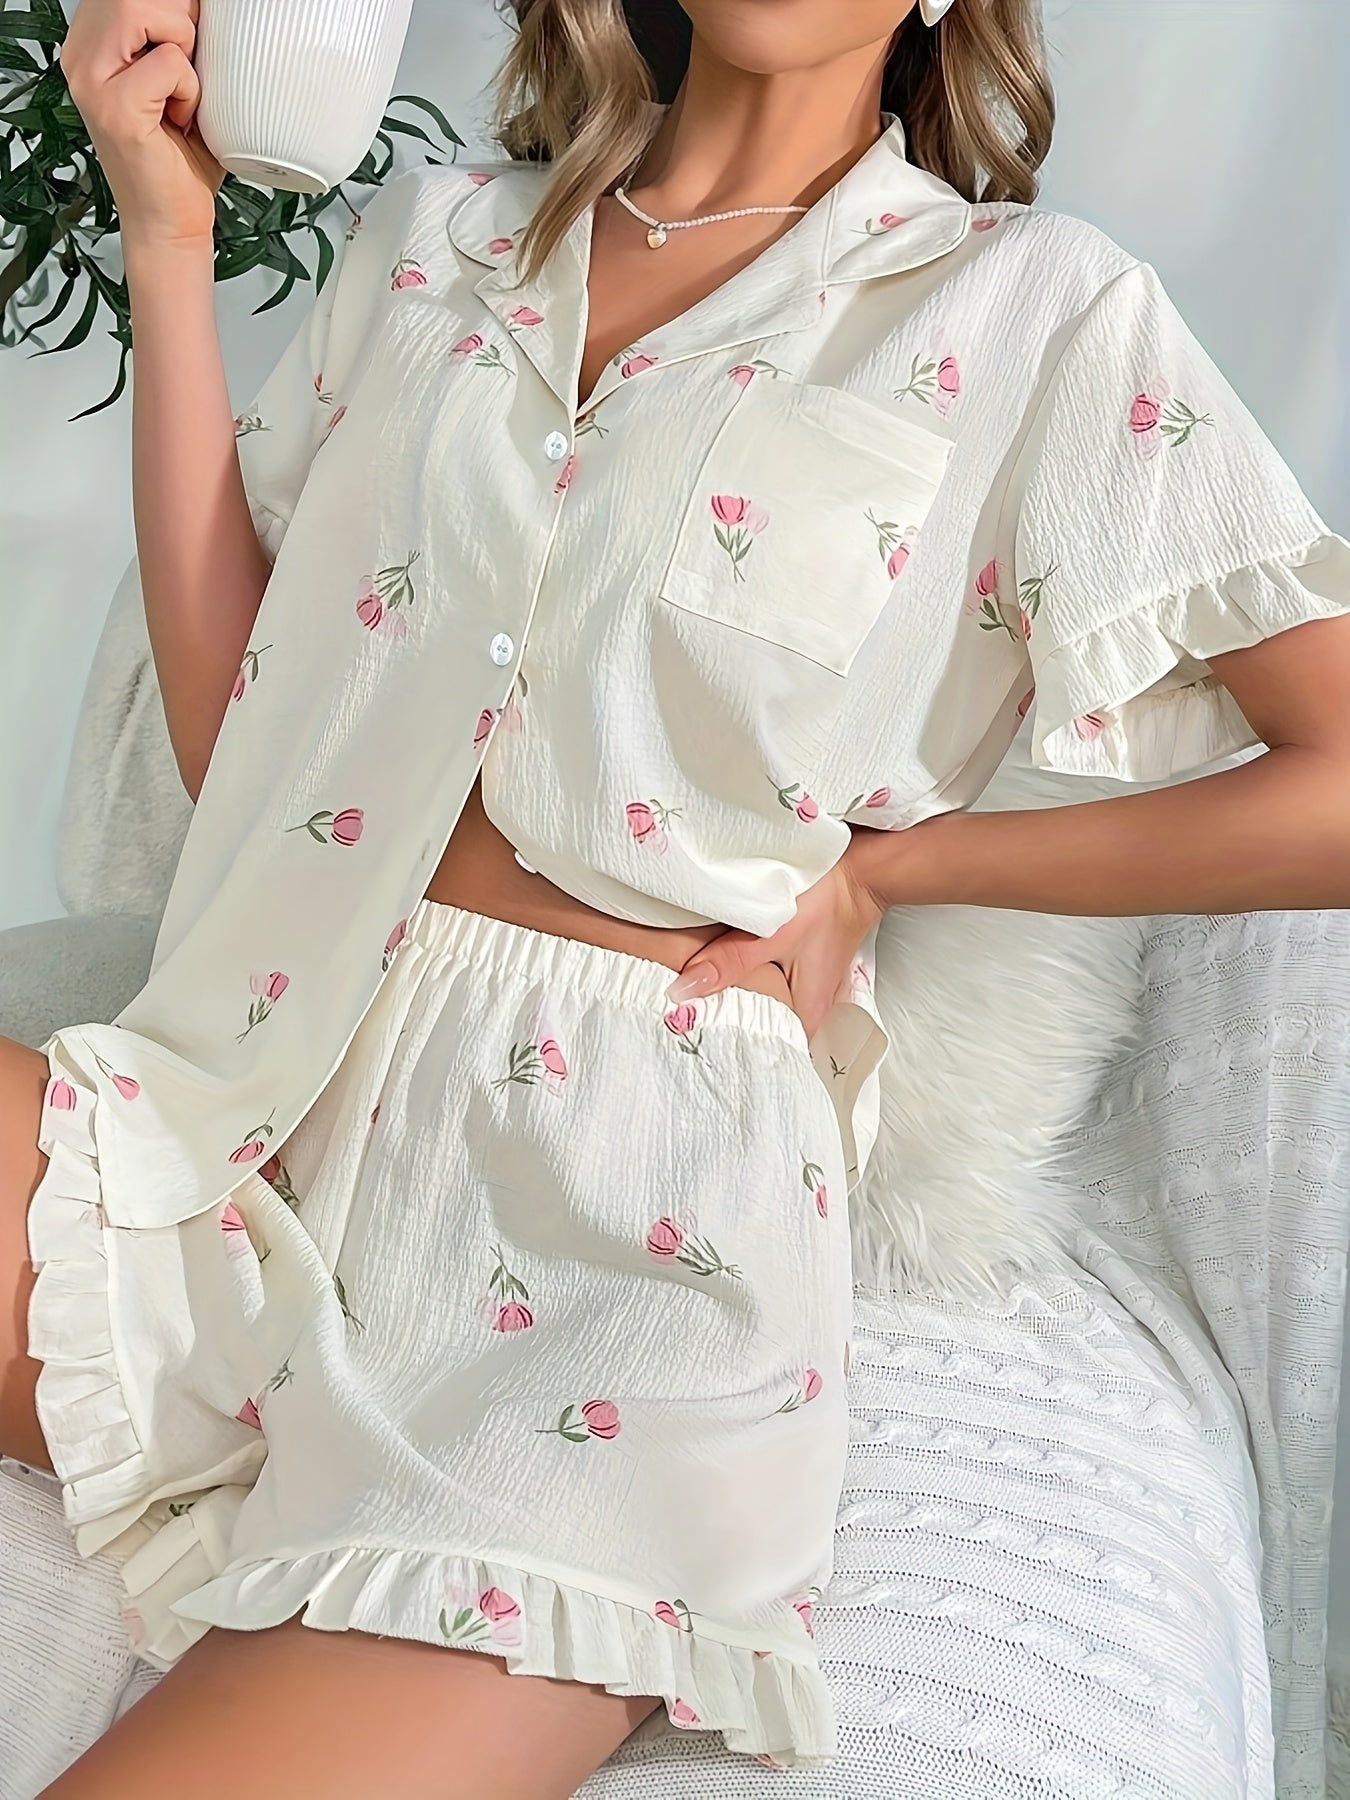 Summer Floral Print Pajama Set - Soft Fabric with Ruffle Hem, Short Sleeve Button-Down Lapel Top & Stretchy Elastic Shorts